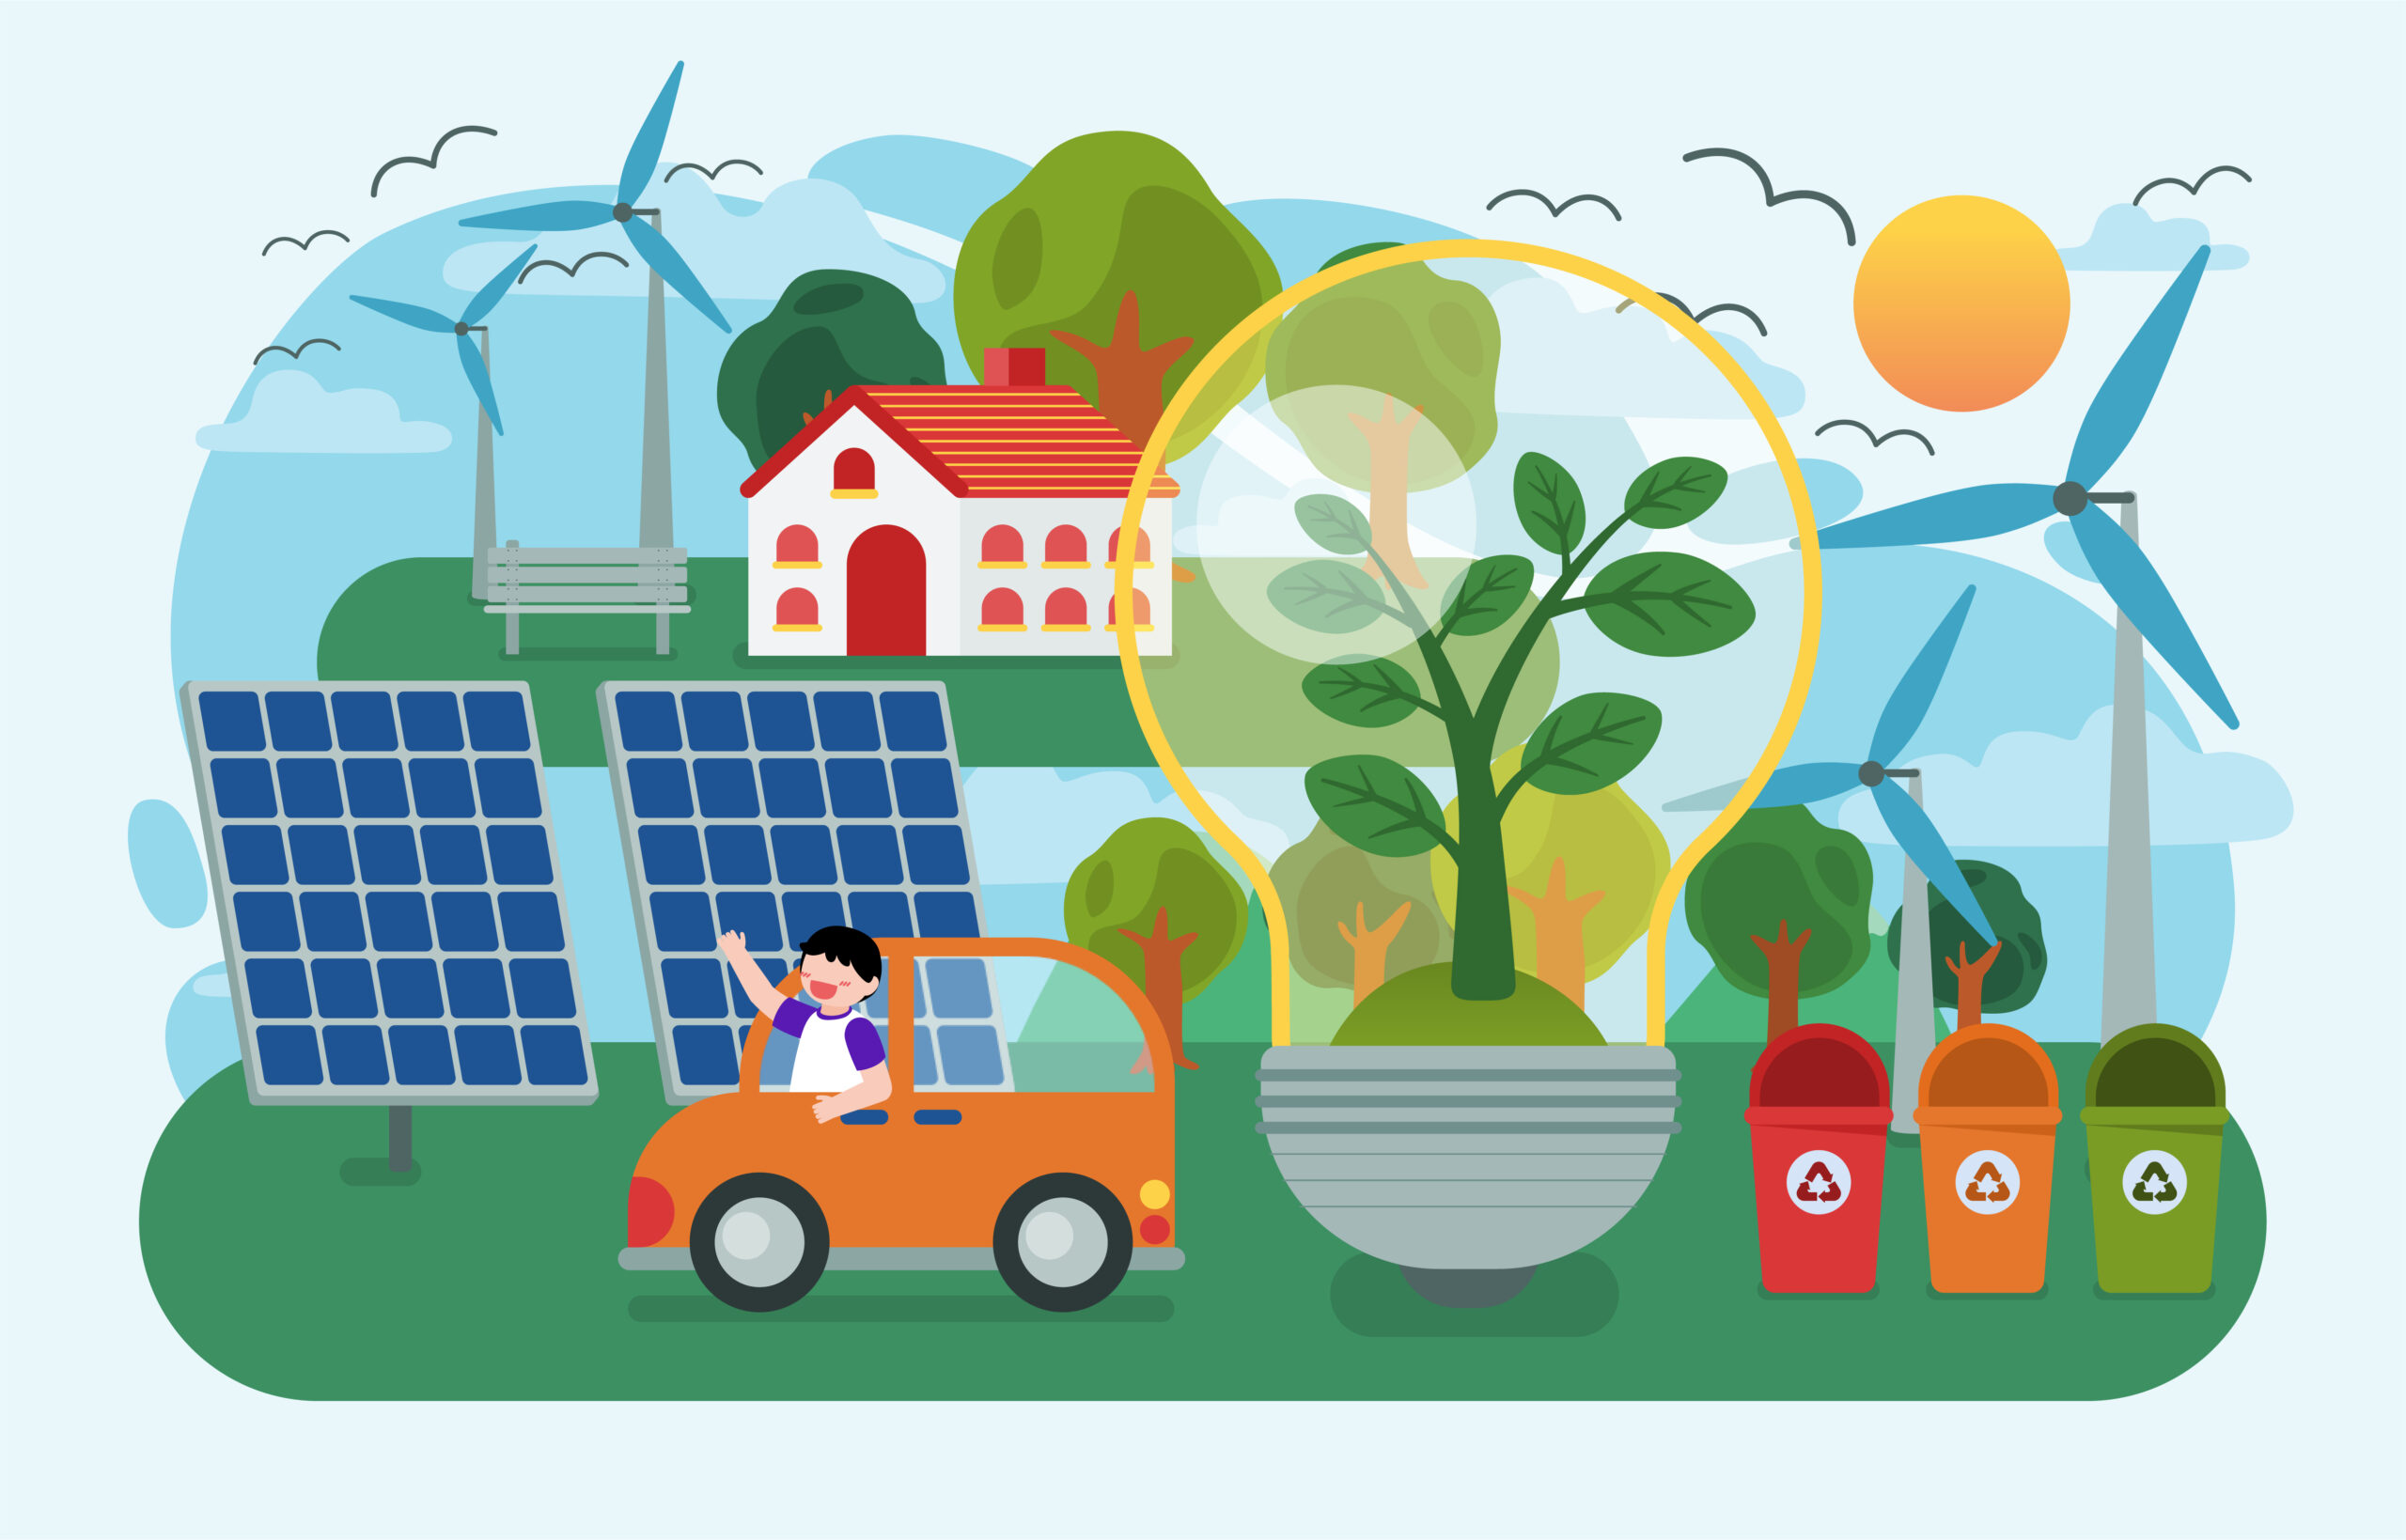 The children planting trees and using renewable energy from nature with Solar energy From solar panel and wind turbine, Happy earth day concept, vector illustration